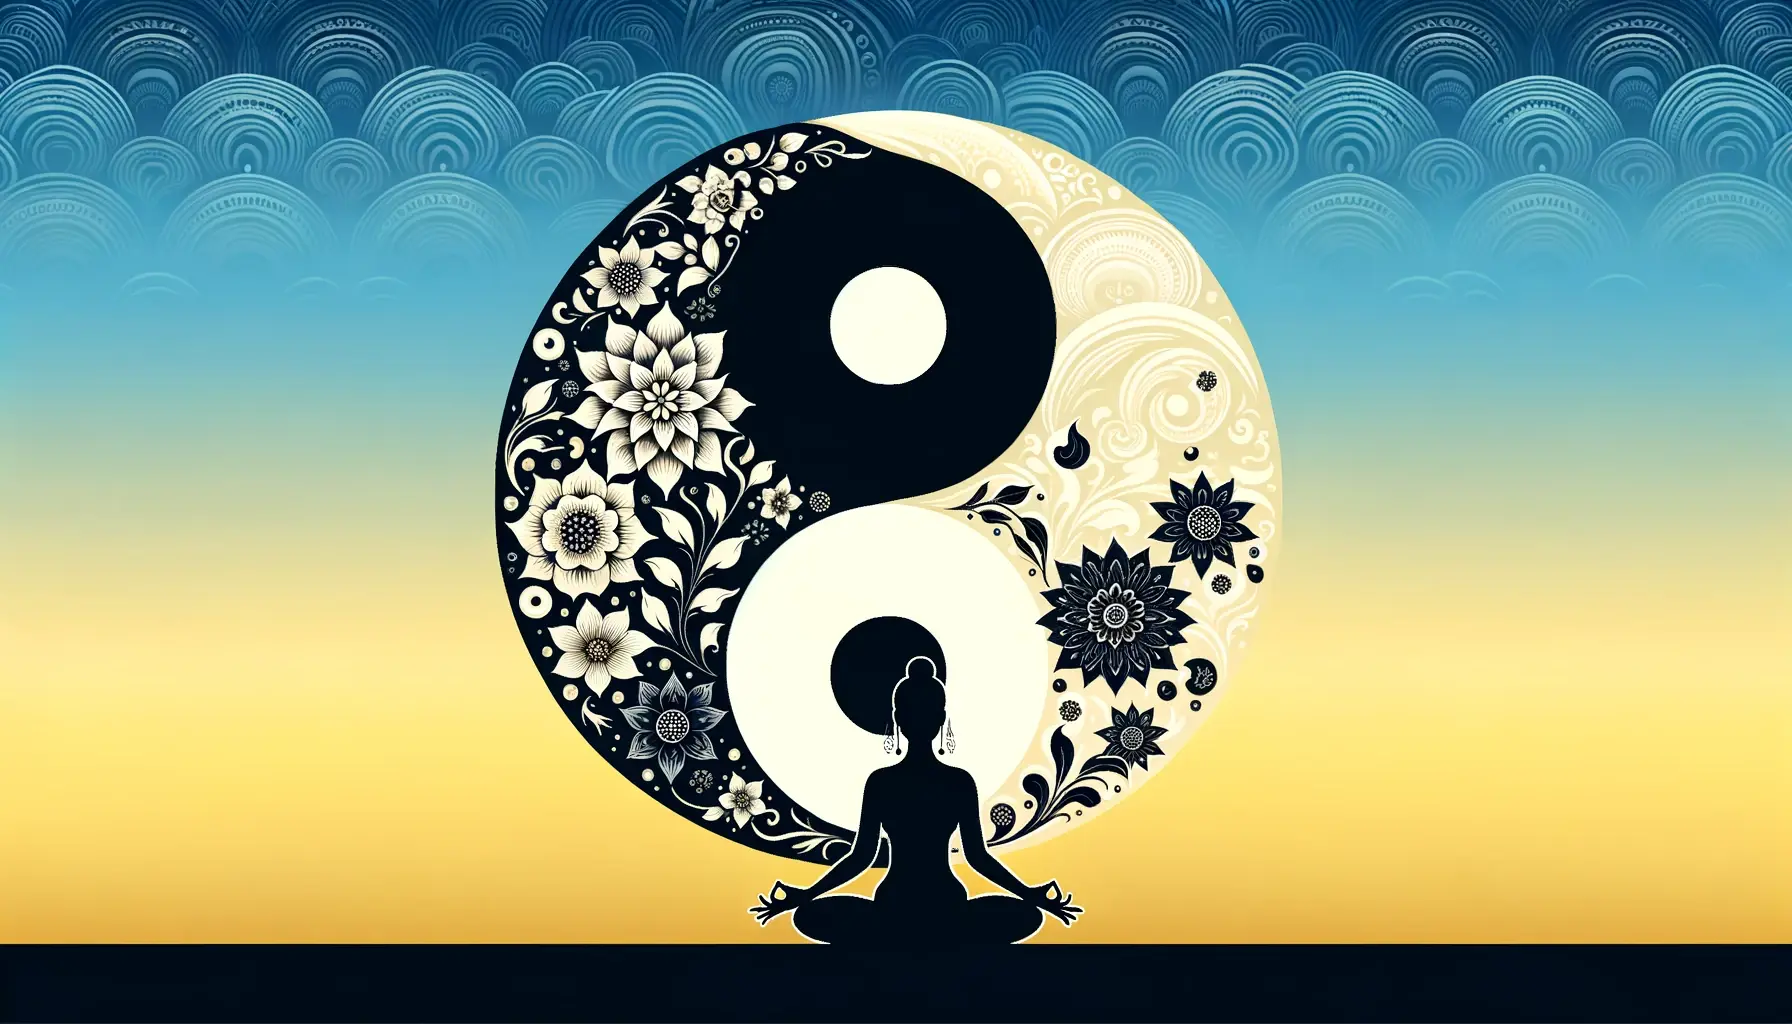 Silhouette of a female figure in the lotus position against a gradient backdrop with the Yin Yang Symbol made of flowers in the sky above her